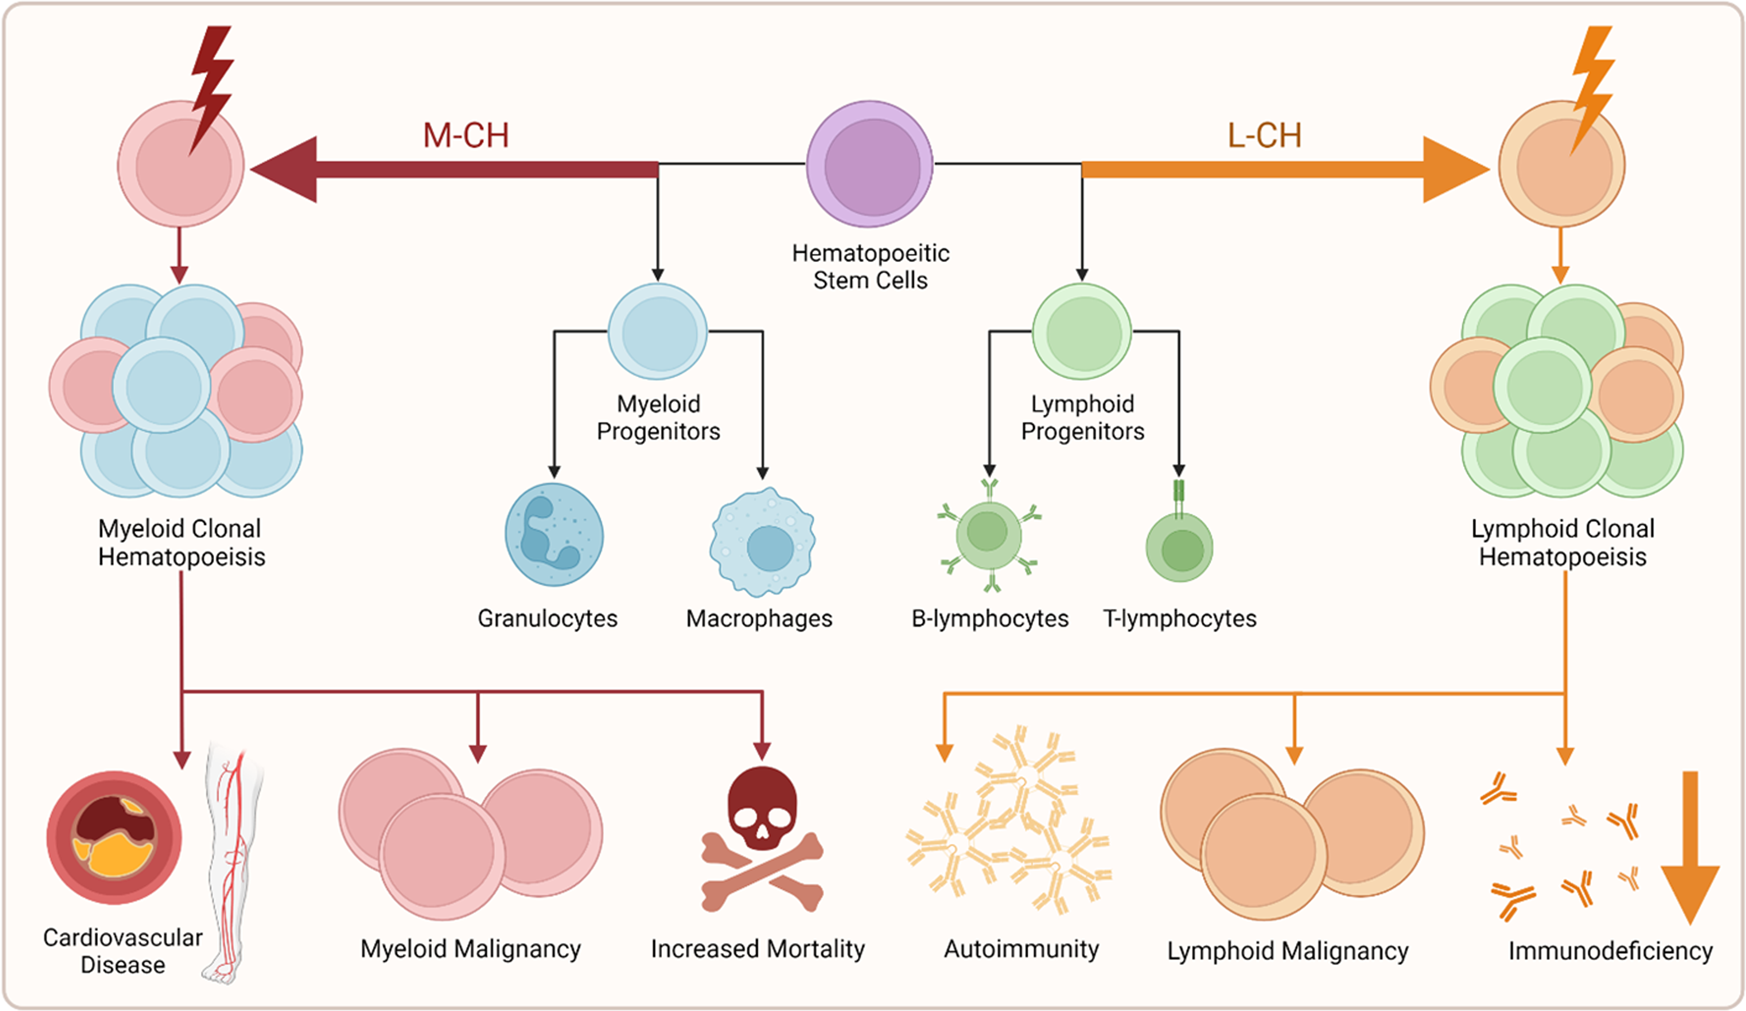 Lymphoid clonal hematopoiesis: implications for malignancy, immunity, and  treatment | Blood Cancer Journal